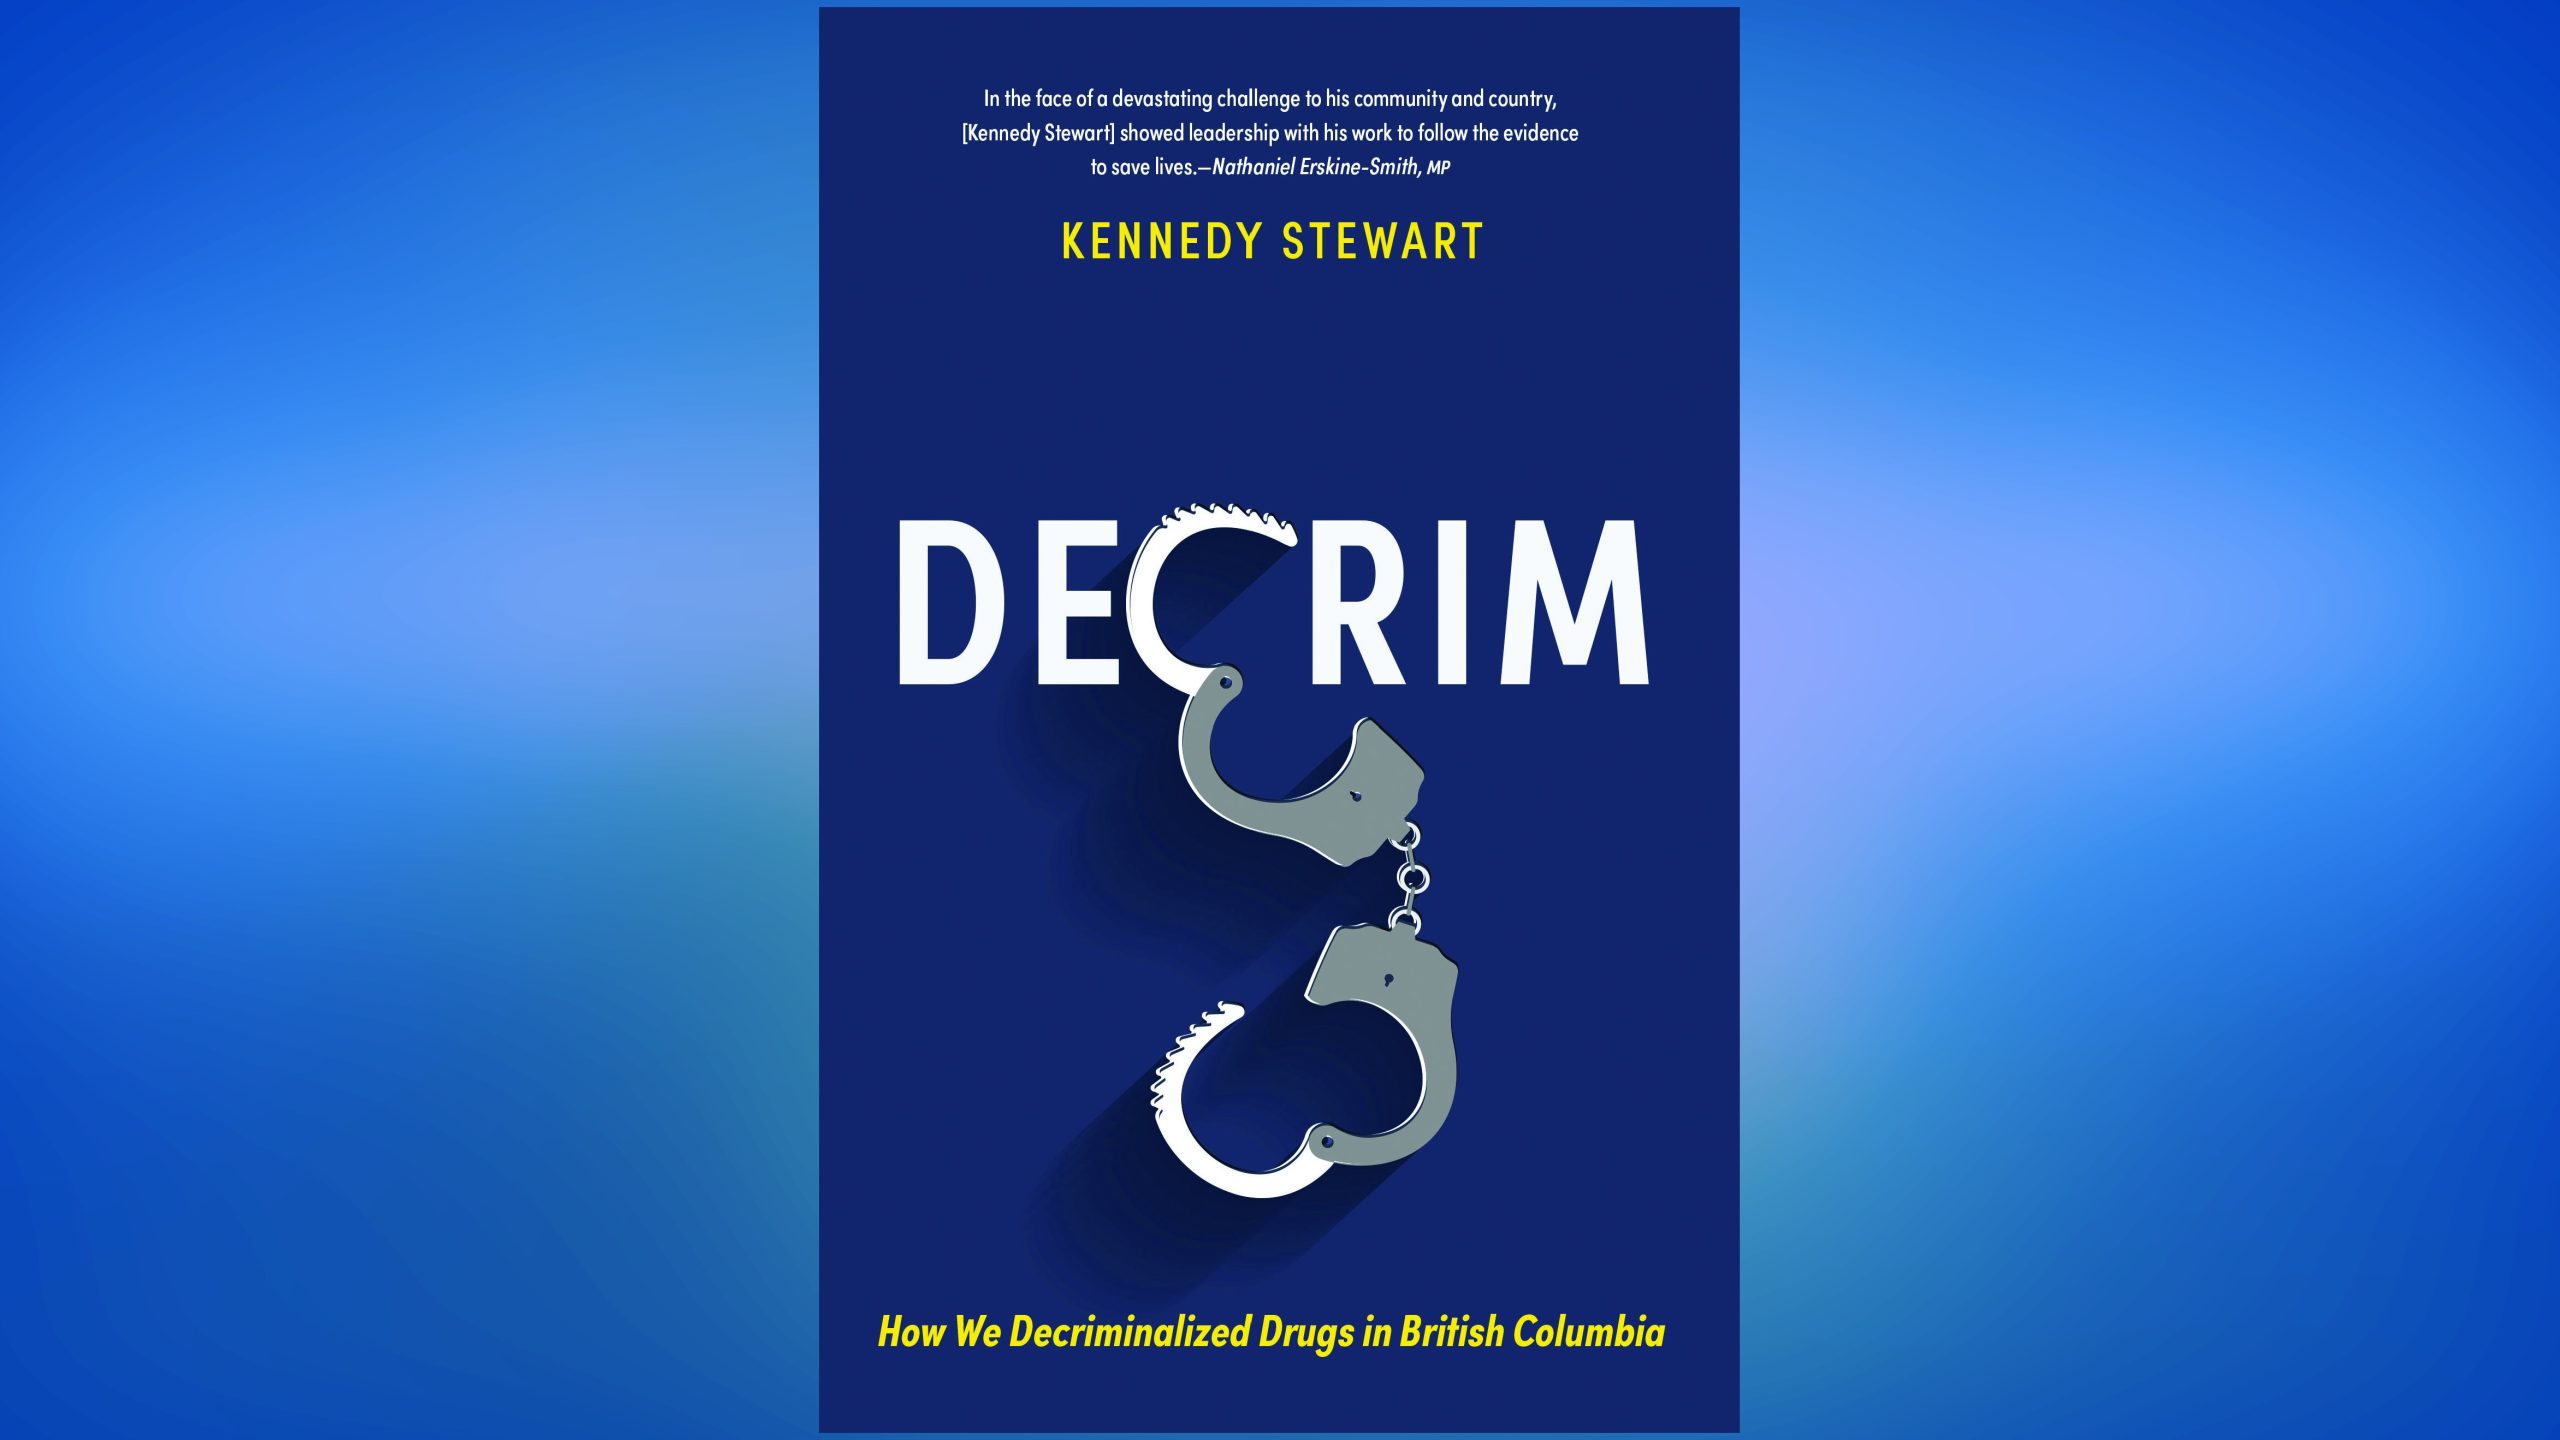 Decrim: How We Decriminalized Drugs in British Columbia is available from Harbour Publishing. (Harbour Publishing)